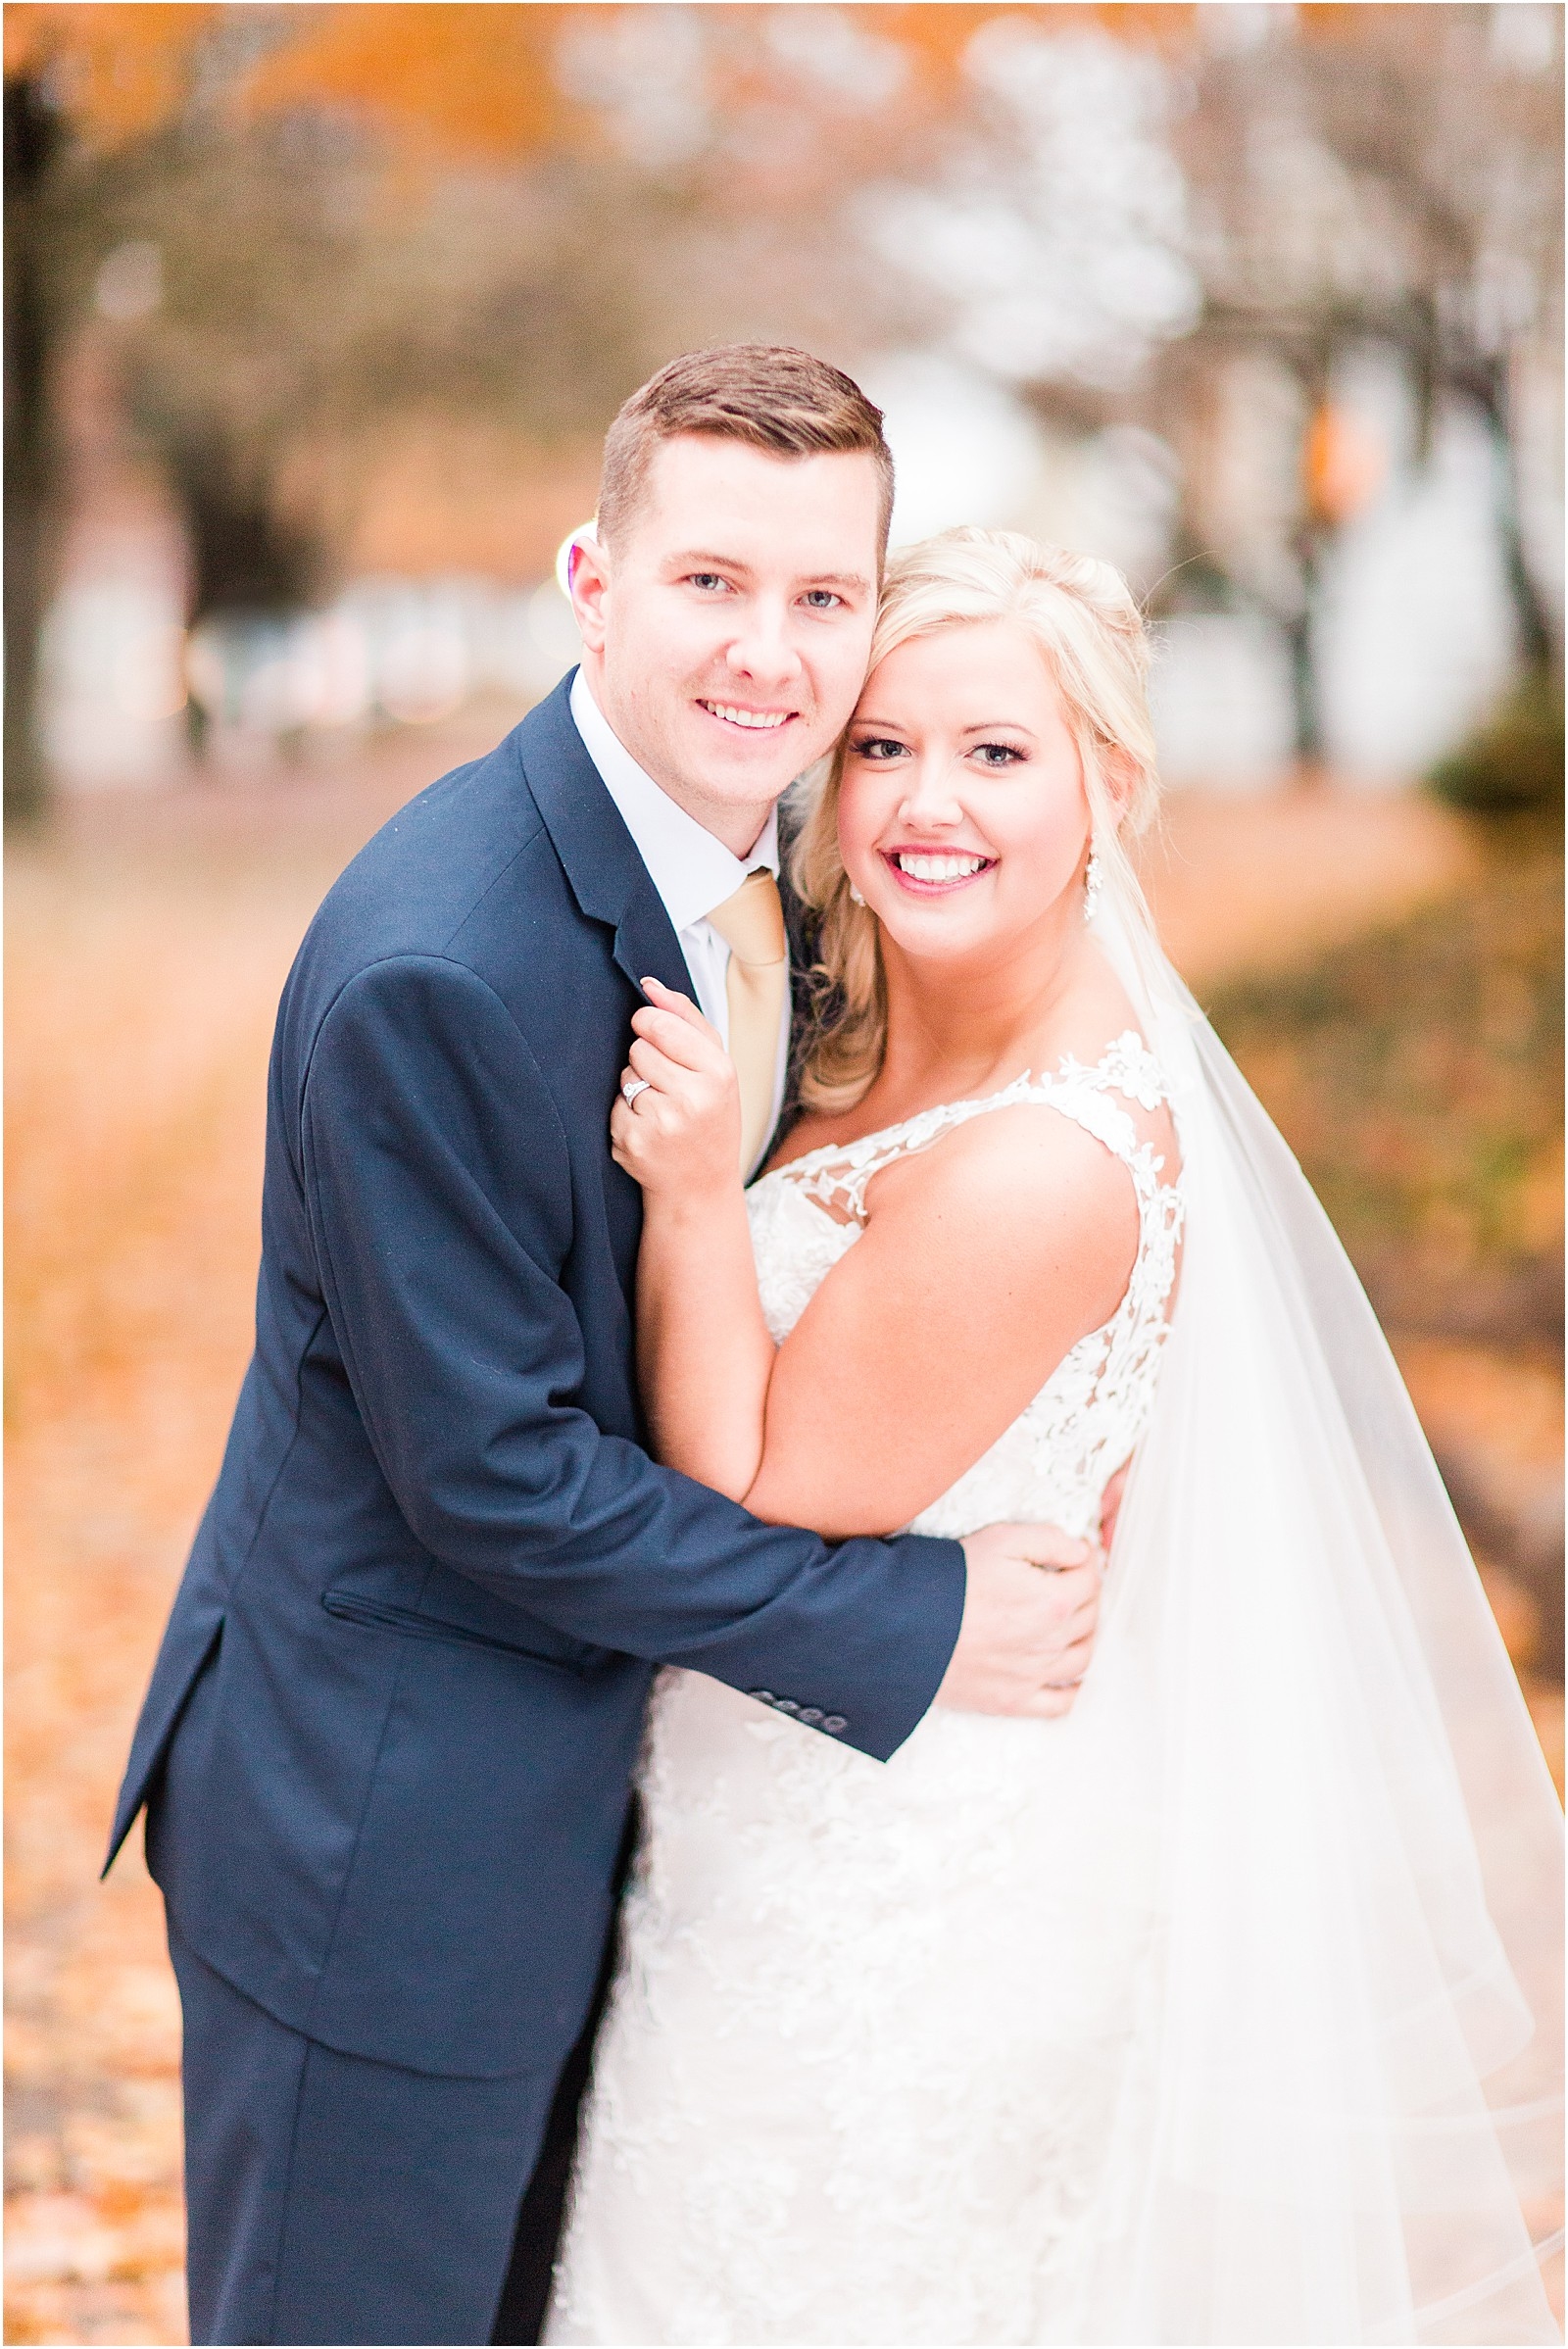 Haylee and Dillon's Evansville, Indiana wedding by Bret and Brandie Photography.0083.jpg